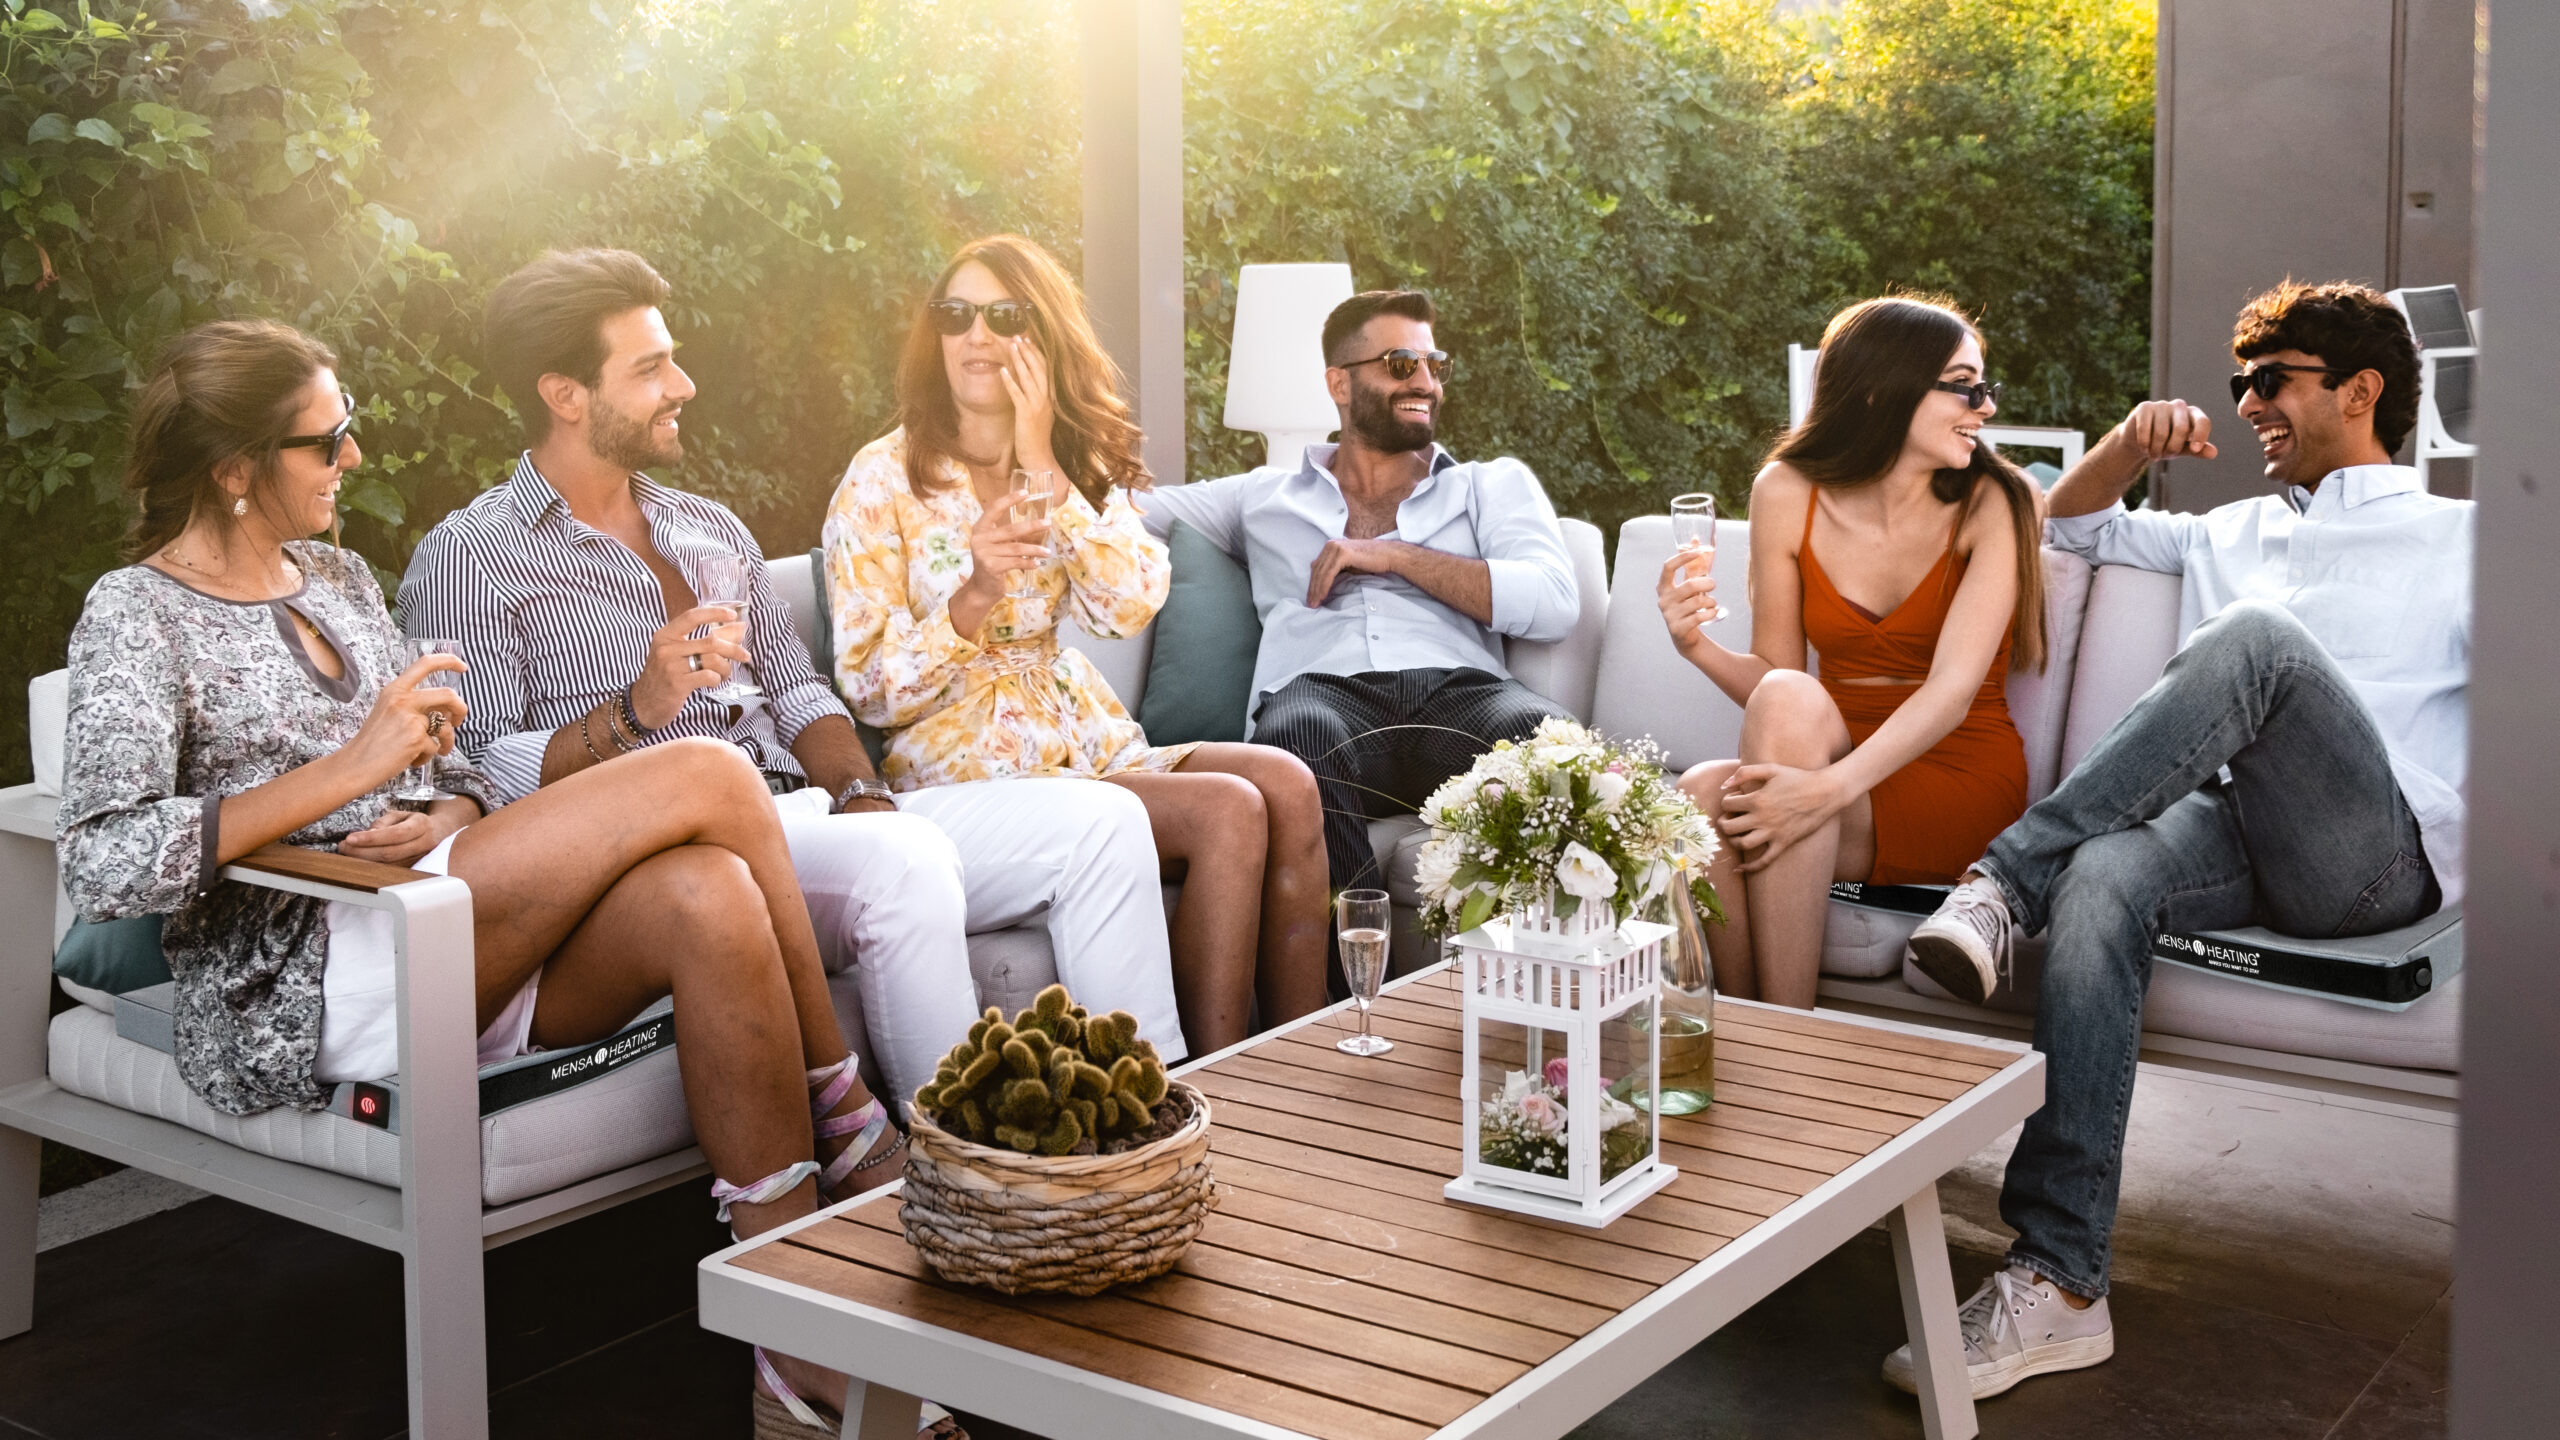 Group of cheerful young people carefree sitting together drinking wine at luxury garden - friends get together sitting on a couch in the terrace backyard having fun drinking champagne